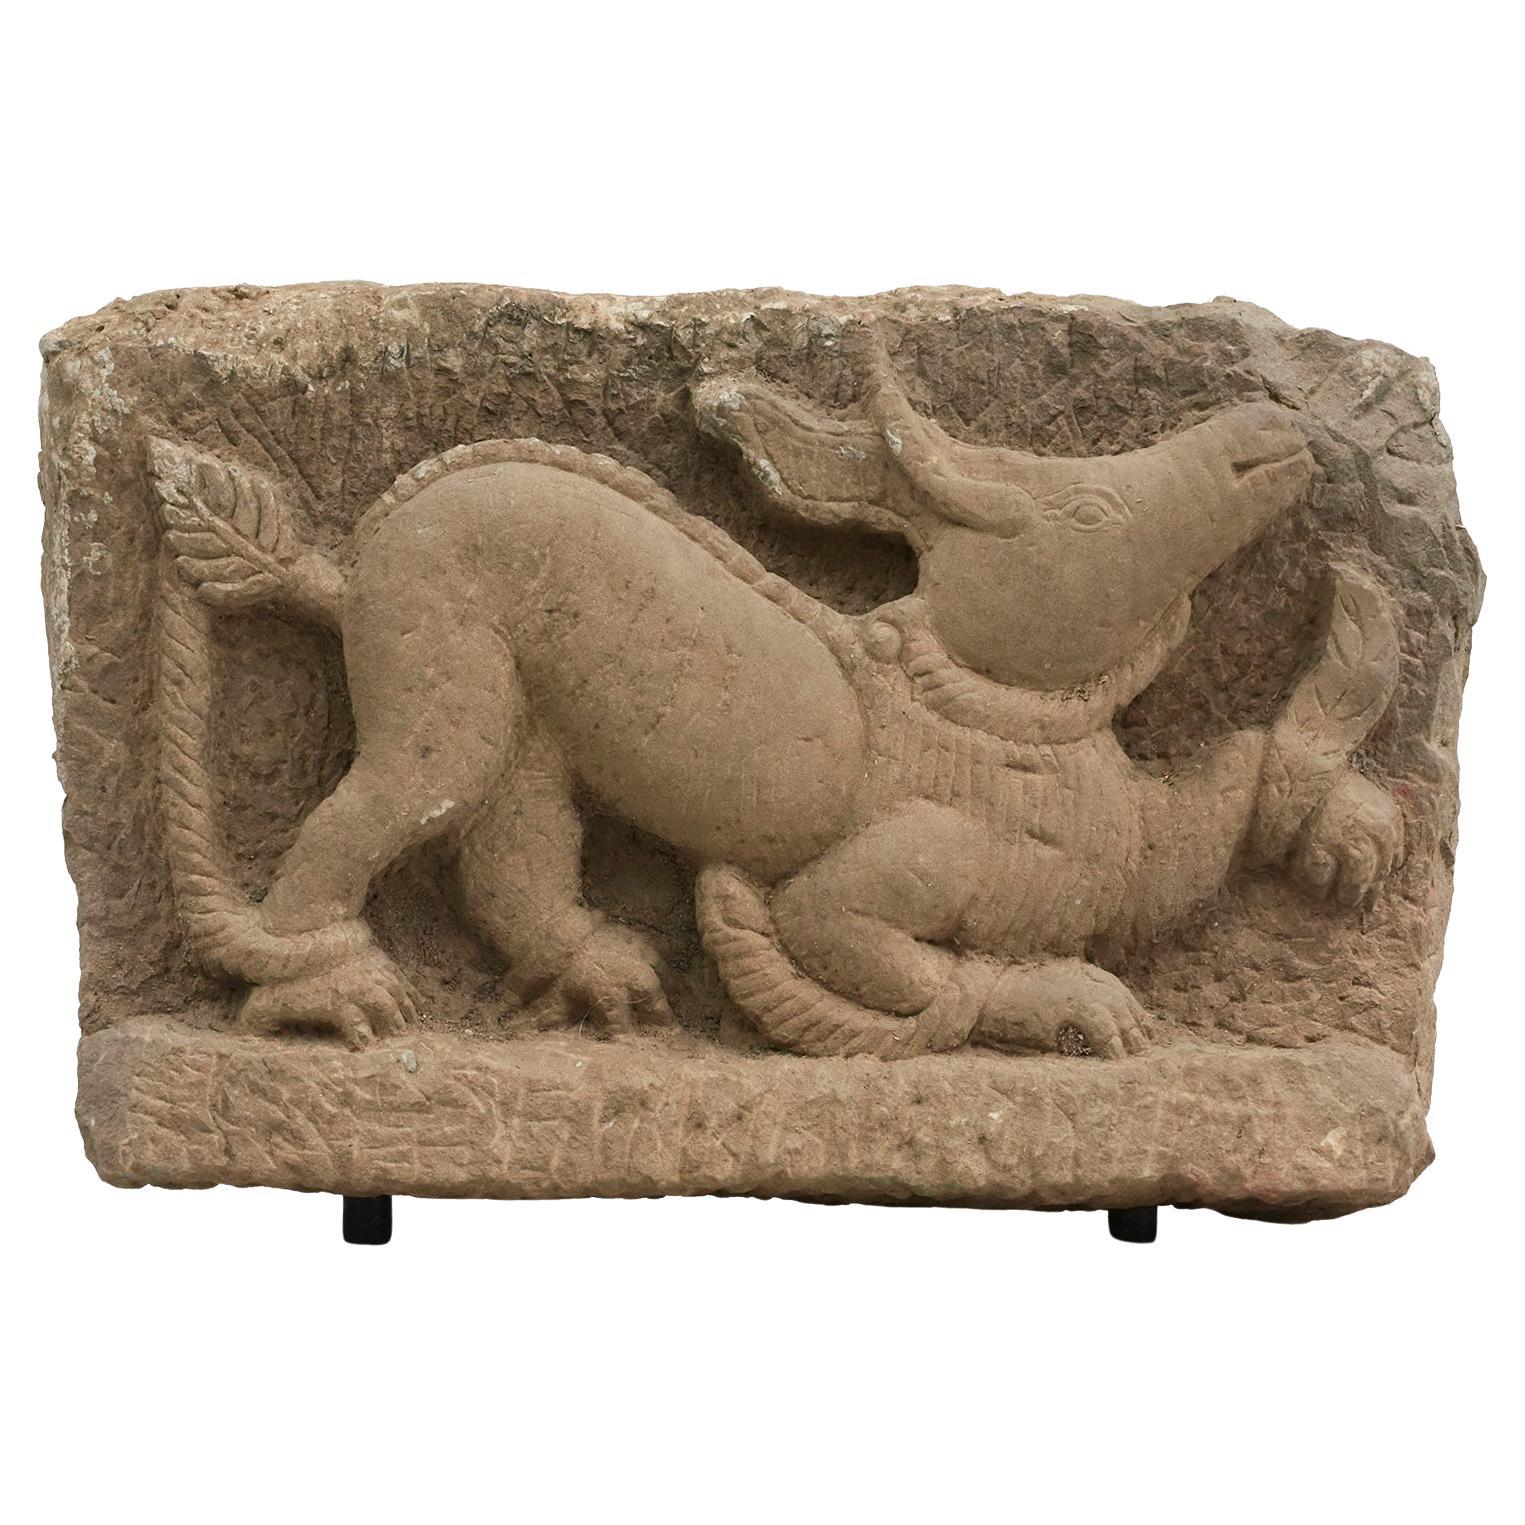 Dragon "Mythical Beast" Sandstone Relief For Sale